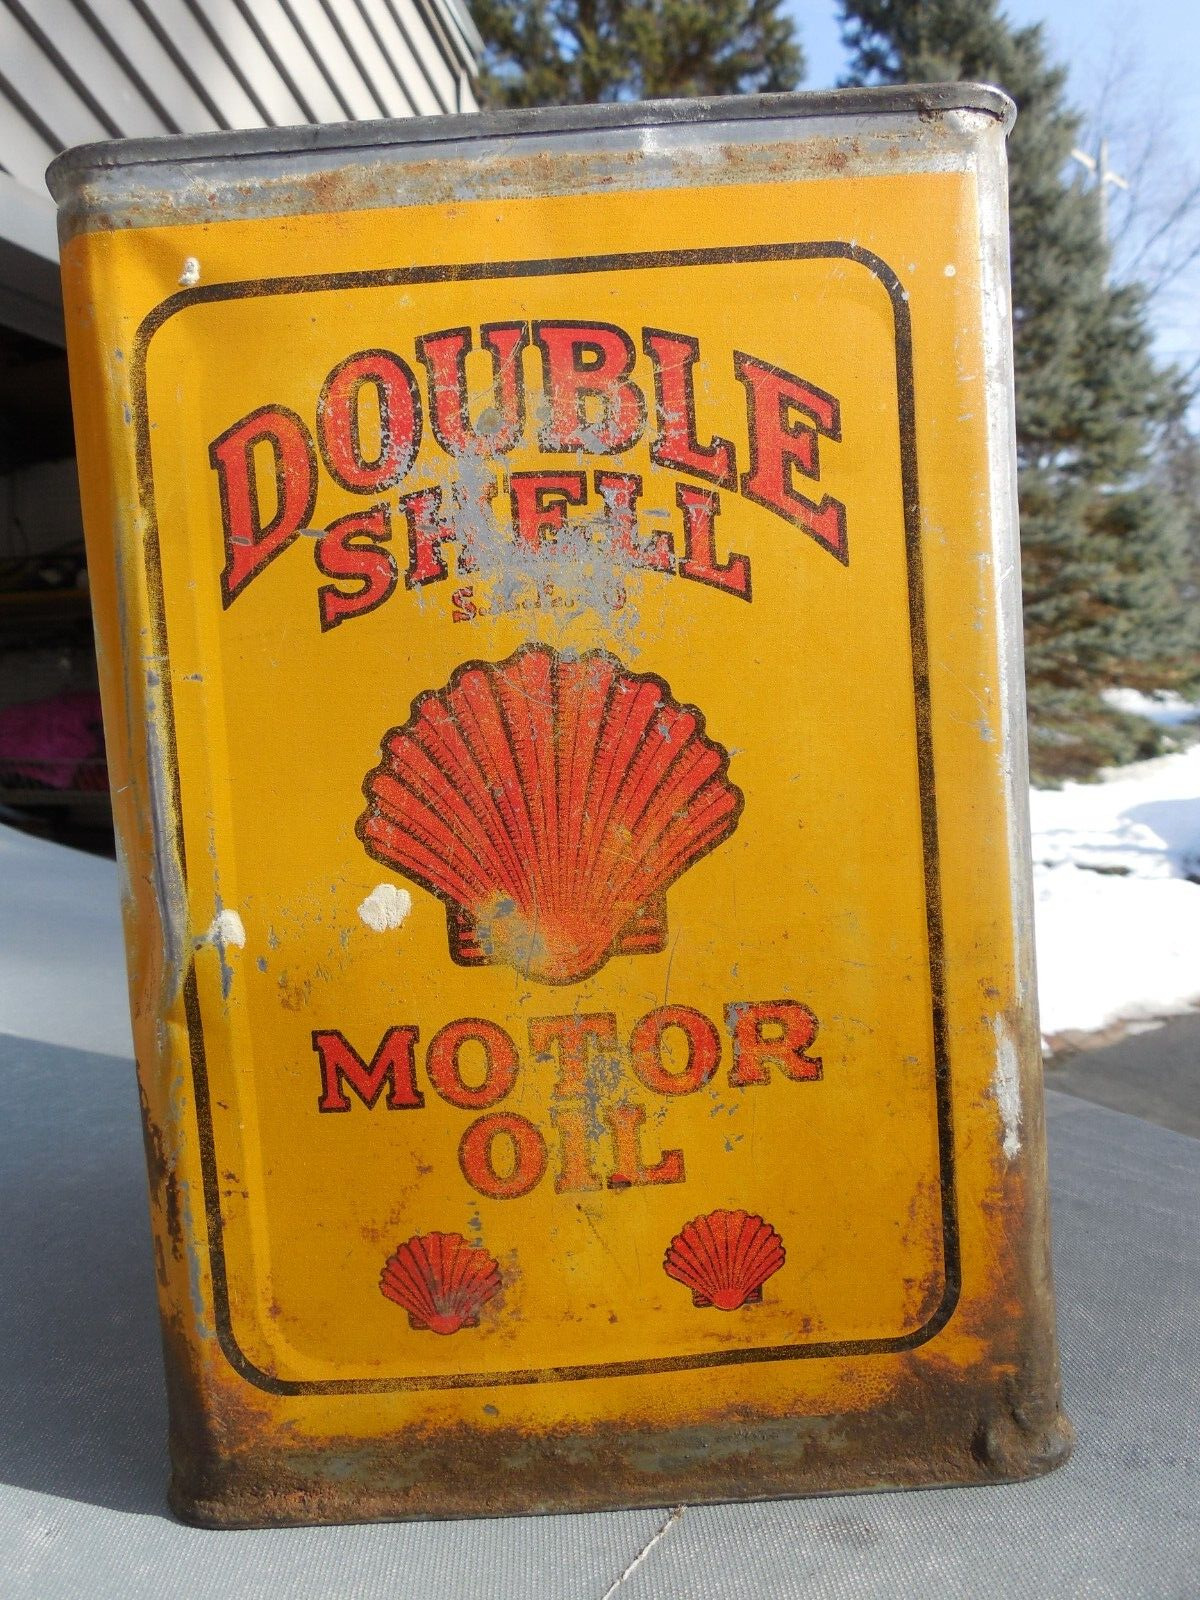 Vintage 1920's Shell motor oil metal 1-Gallon can